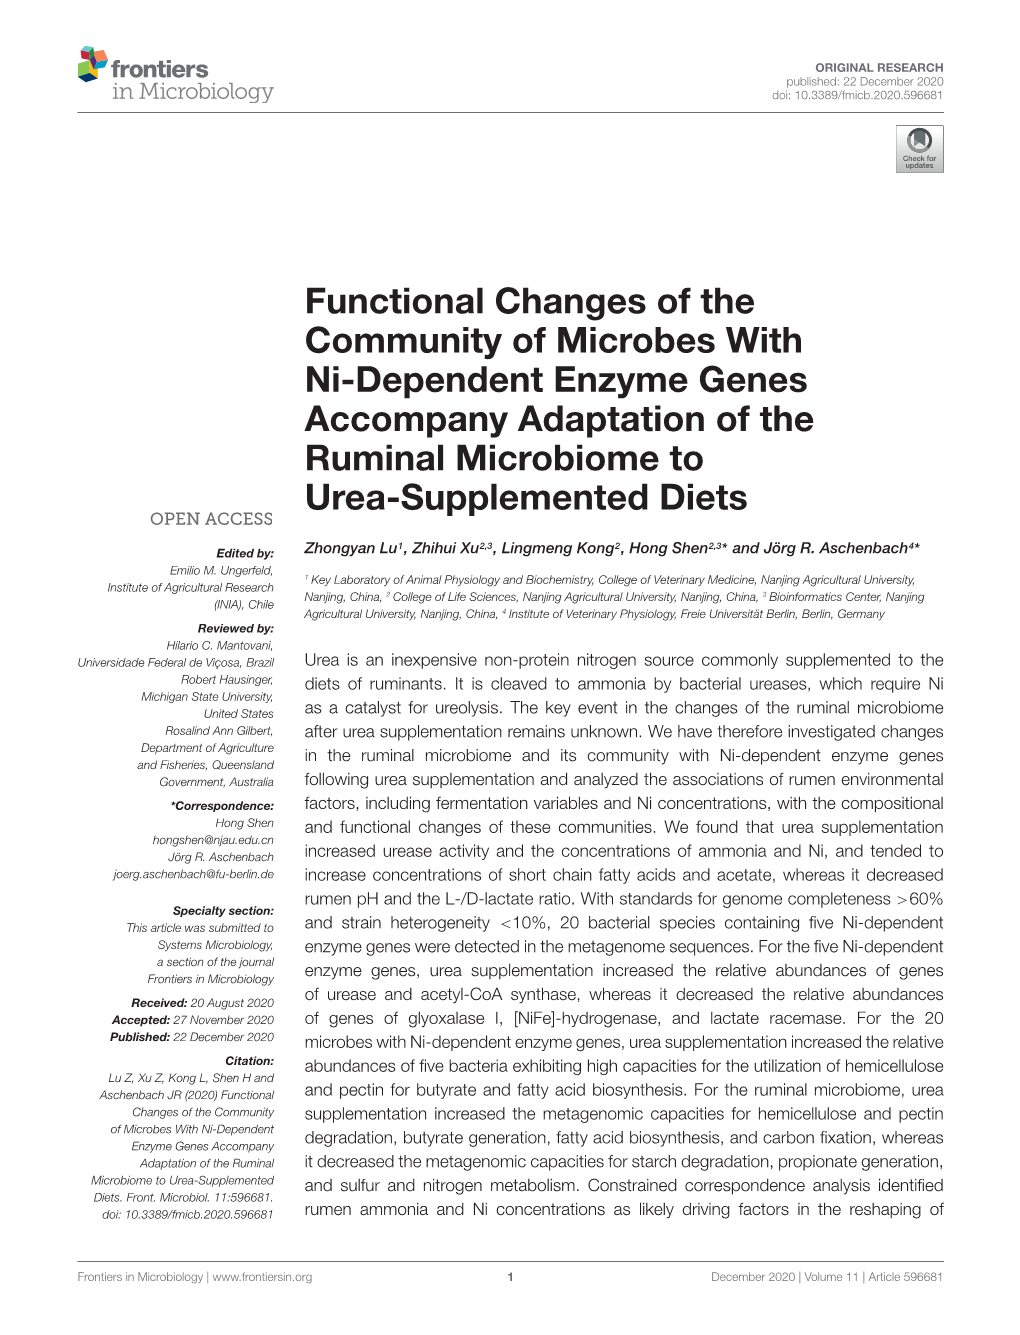 Functional Changes of the Community of Microbes with Ni-Dependent Enzyme Genes Accompany Adaptation of the Ruminal Microbiome to Urea-Supplemented Diets